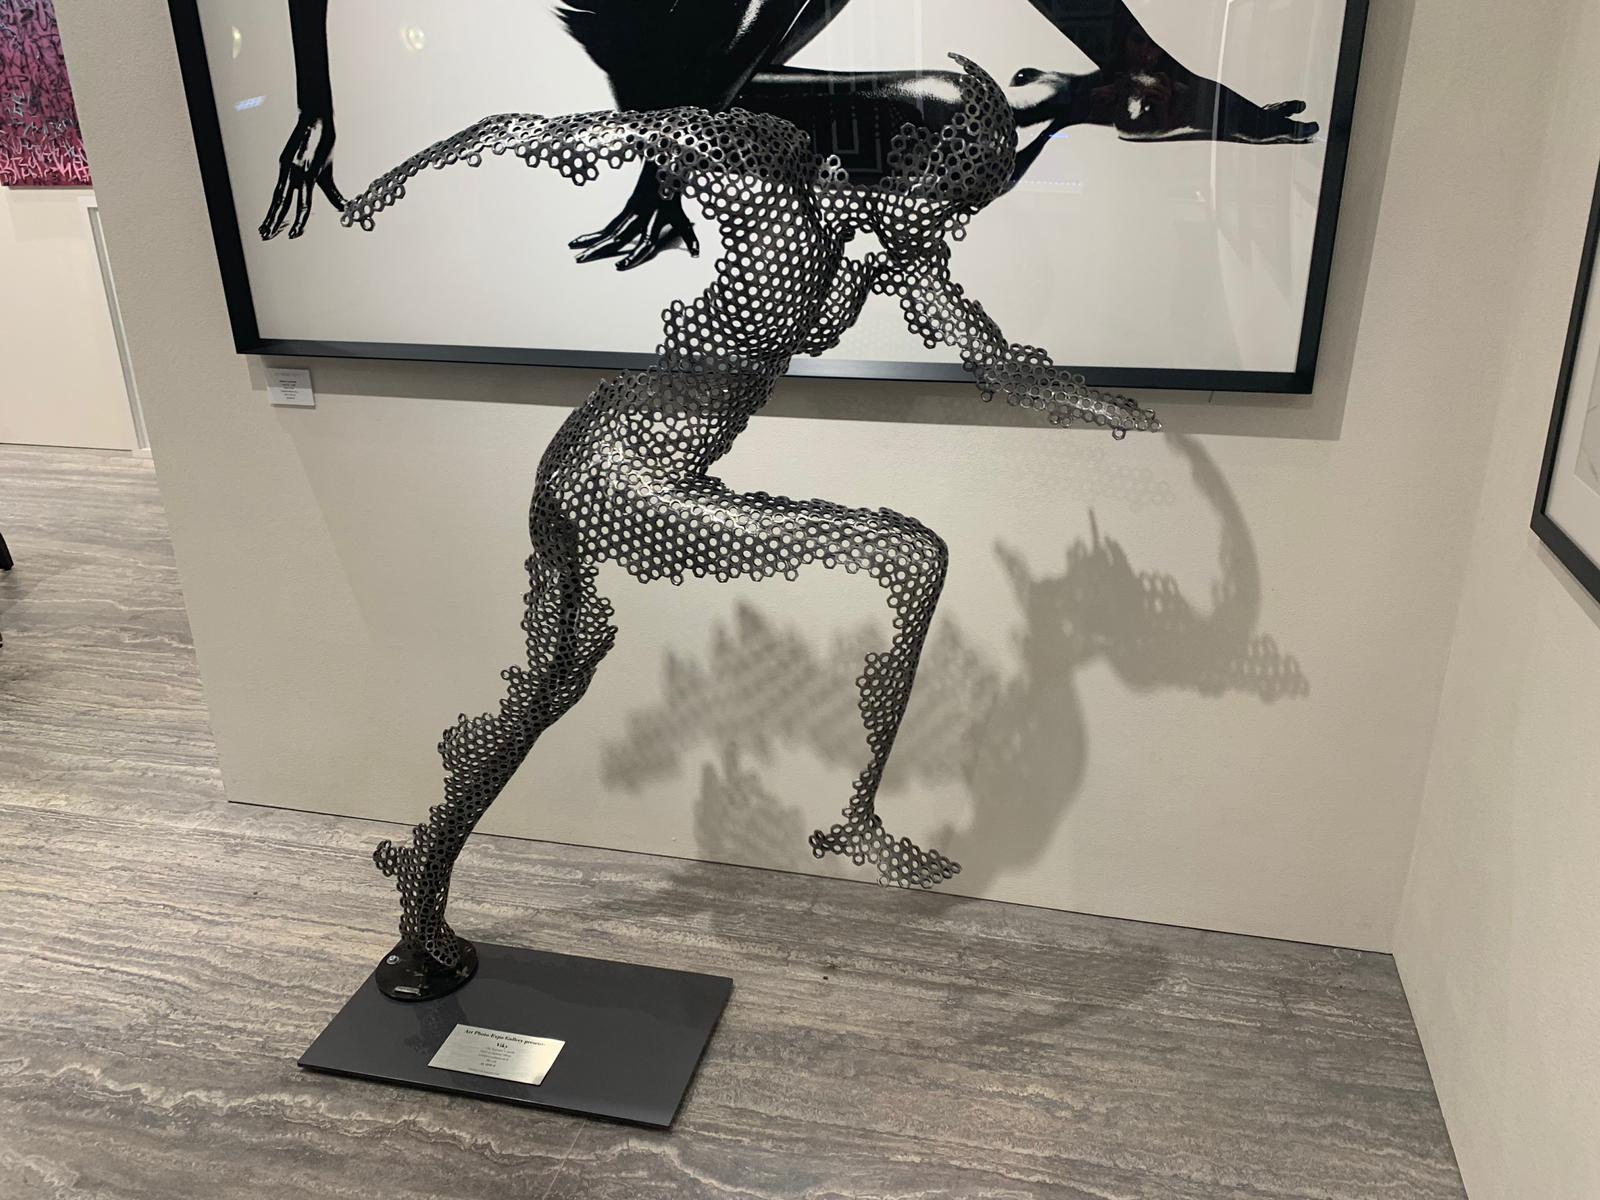 Real Human size 180 cm 
Signed and numbered on the sculpture 
VYKI creates figurative and contemporary sculptures linking steel to the human body.
His works aim to provoke reaction, reflection and adhesion at first glance.
Following his visit to